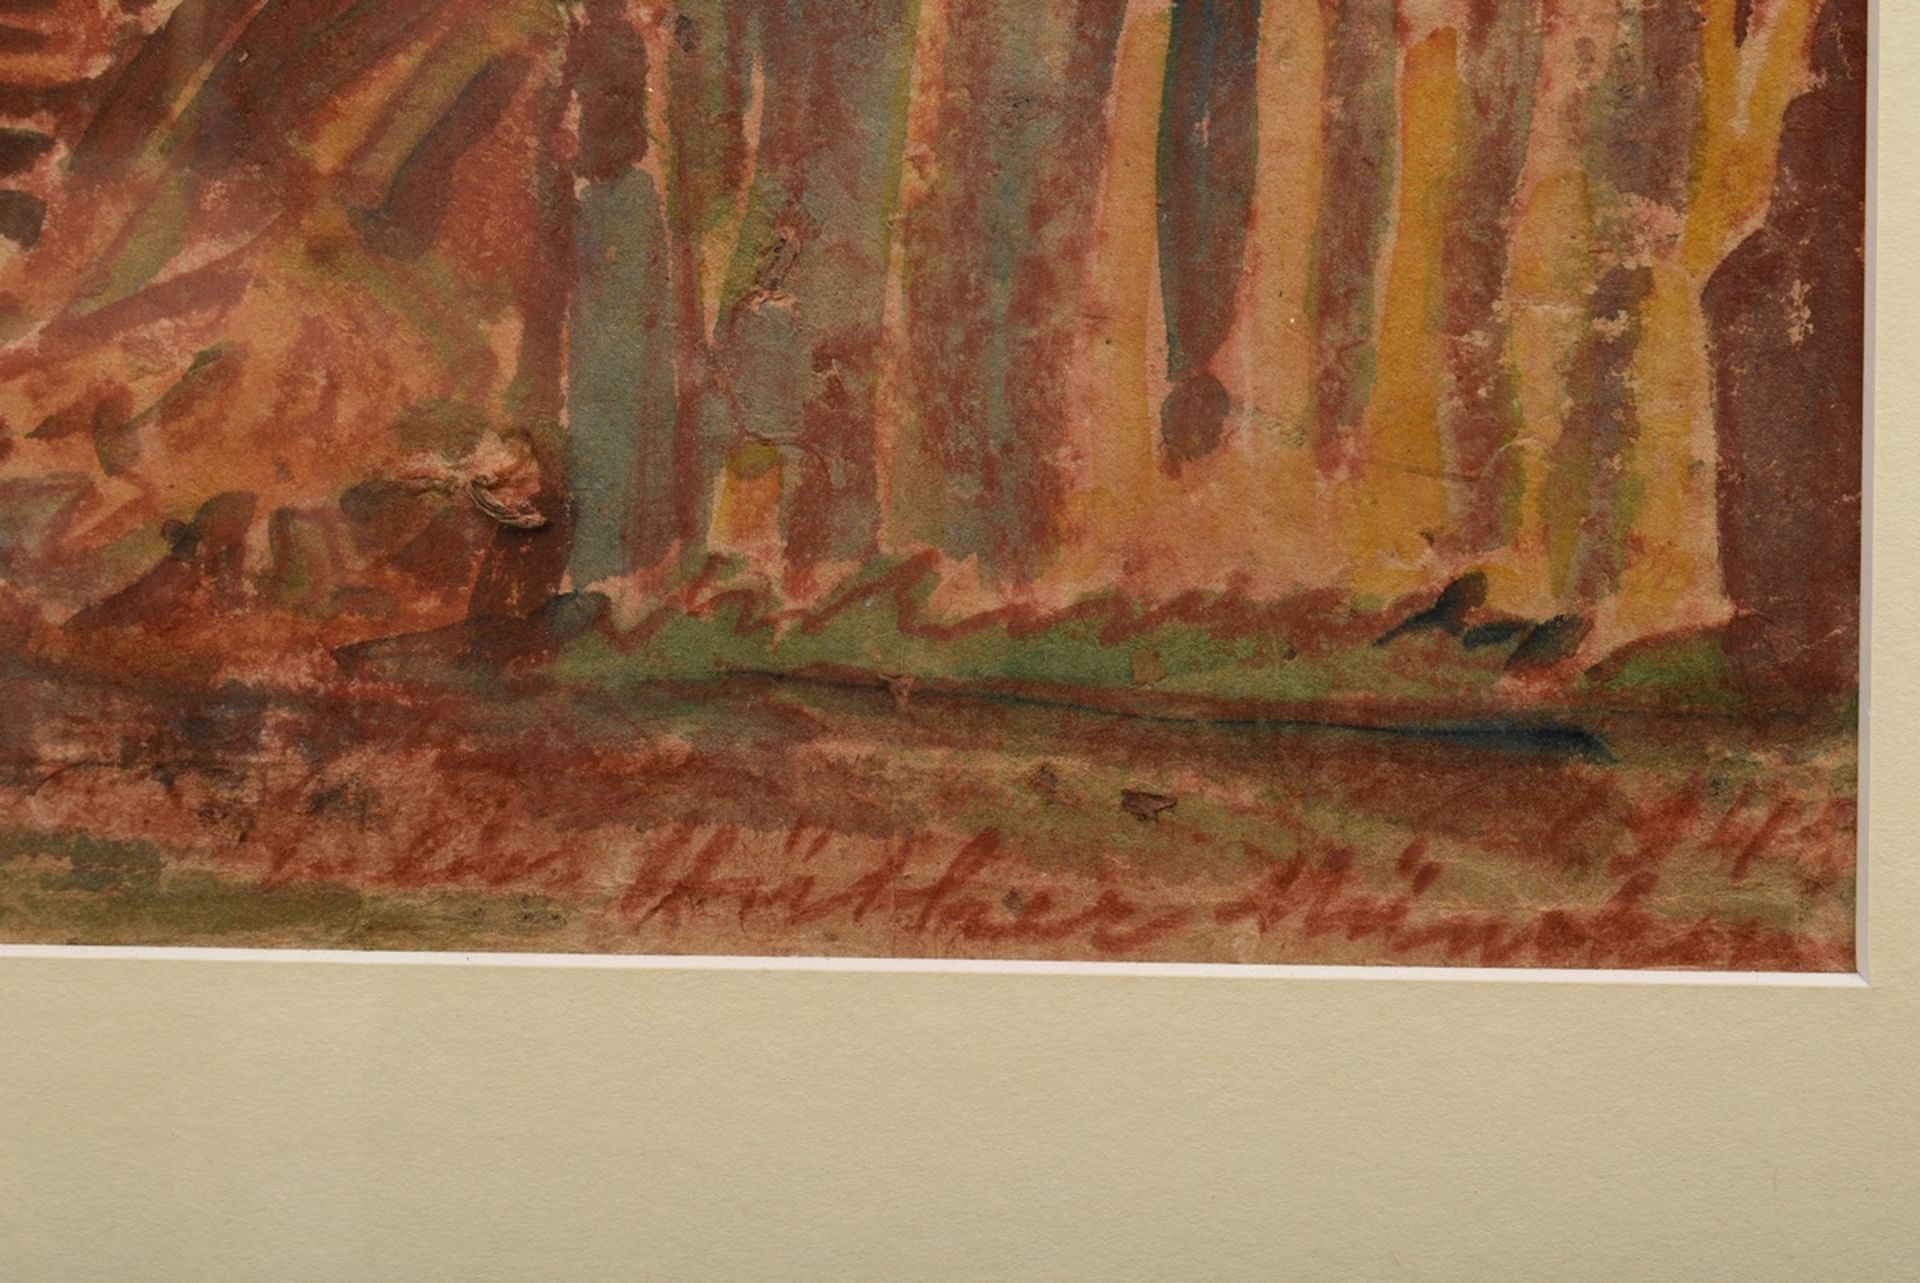 Hüther, Julius (1881-1954) "Houses and Ruins" (probably Munich) 1945(?), watercolour/coloured penci - Image 3 of 3